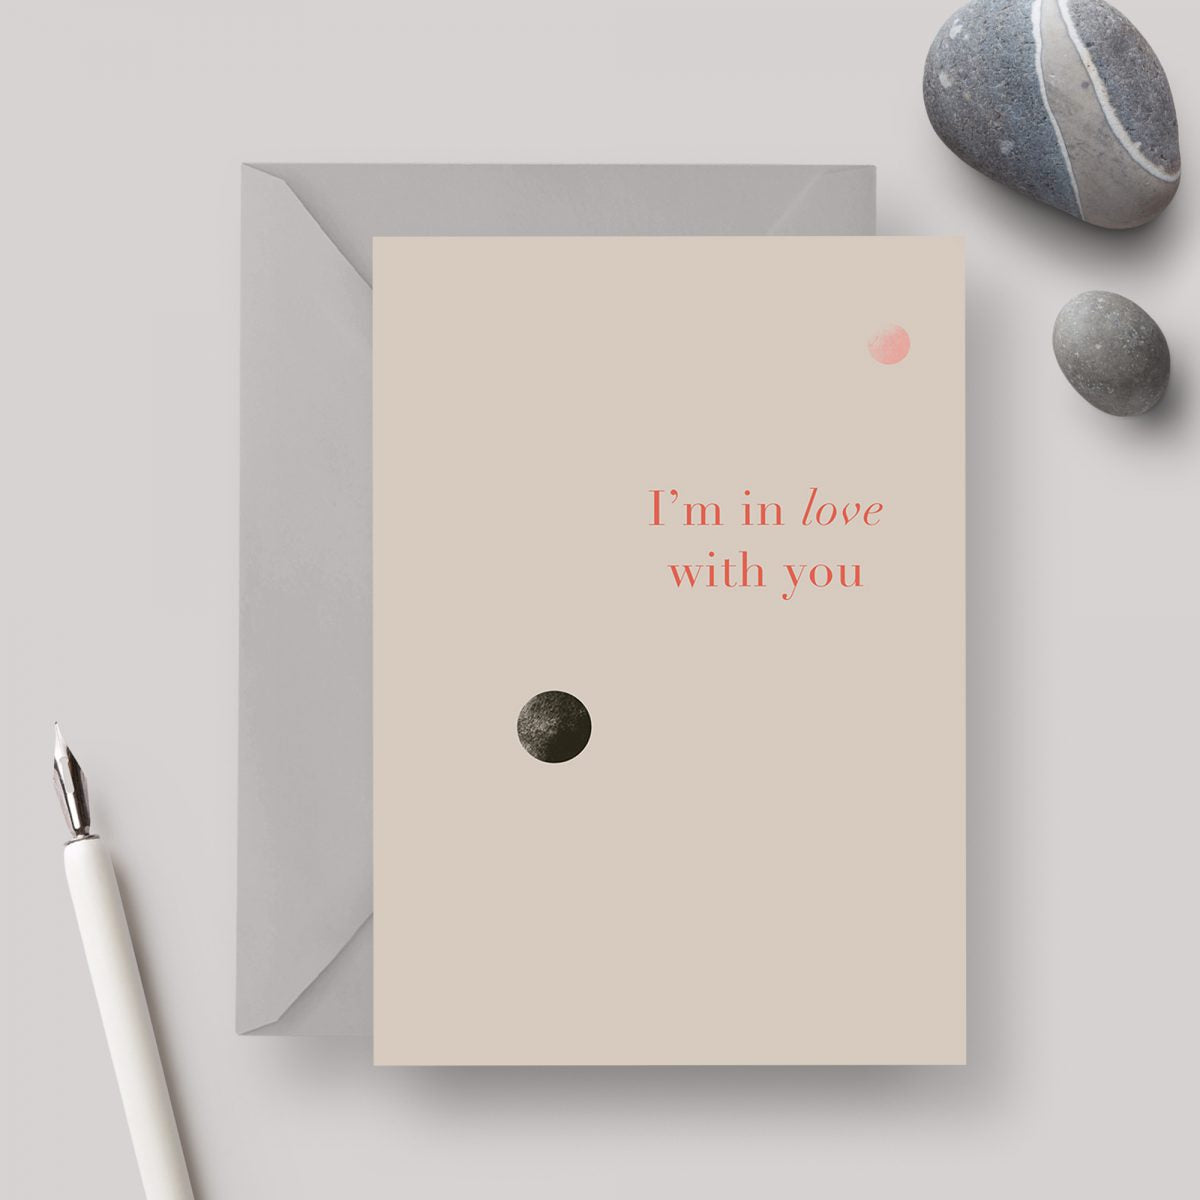 In Love A6 greeting card with grey envelope